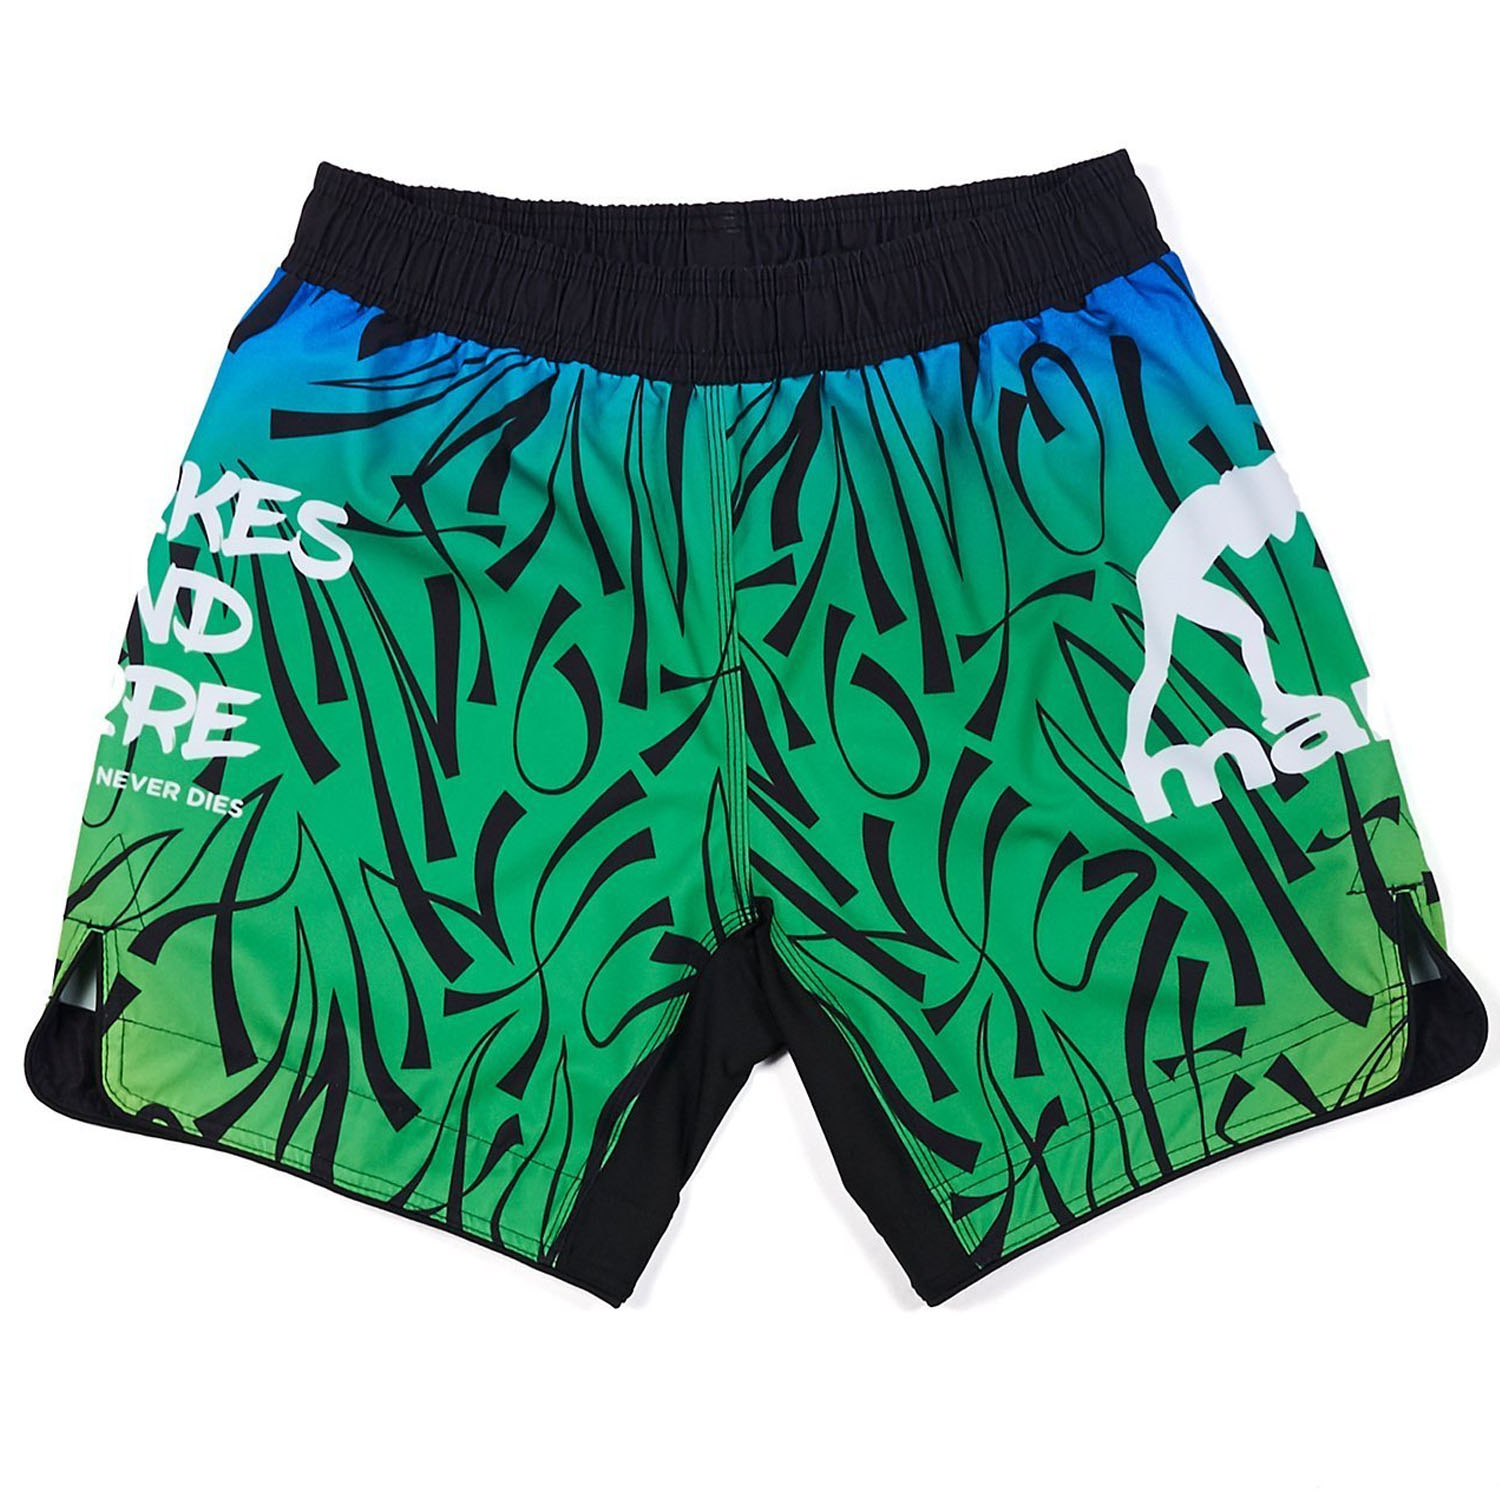 MANTO MMA Fight Shorts, Chokes And More